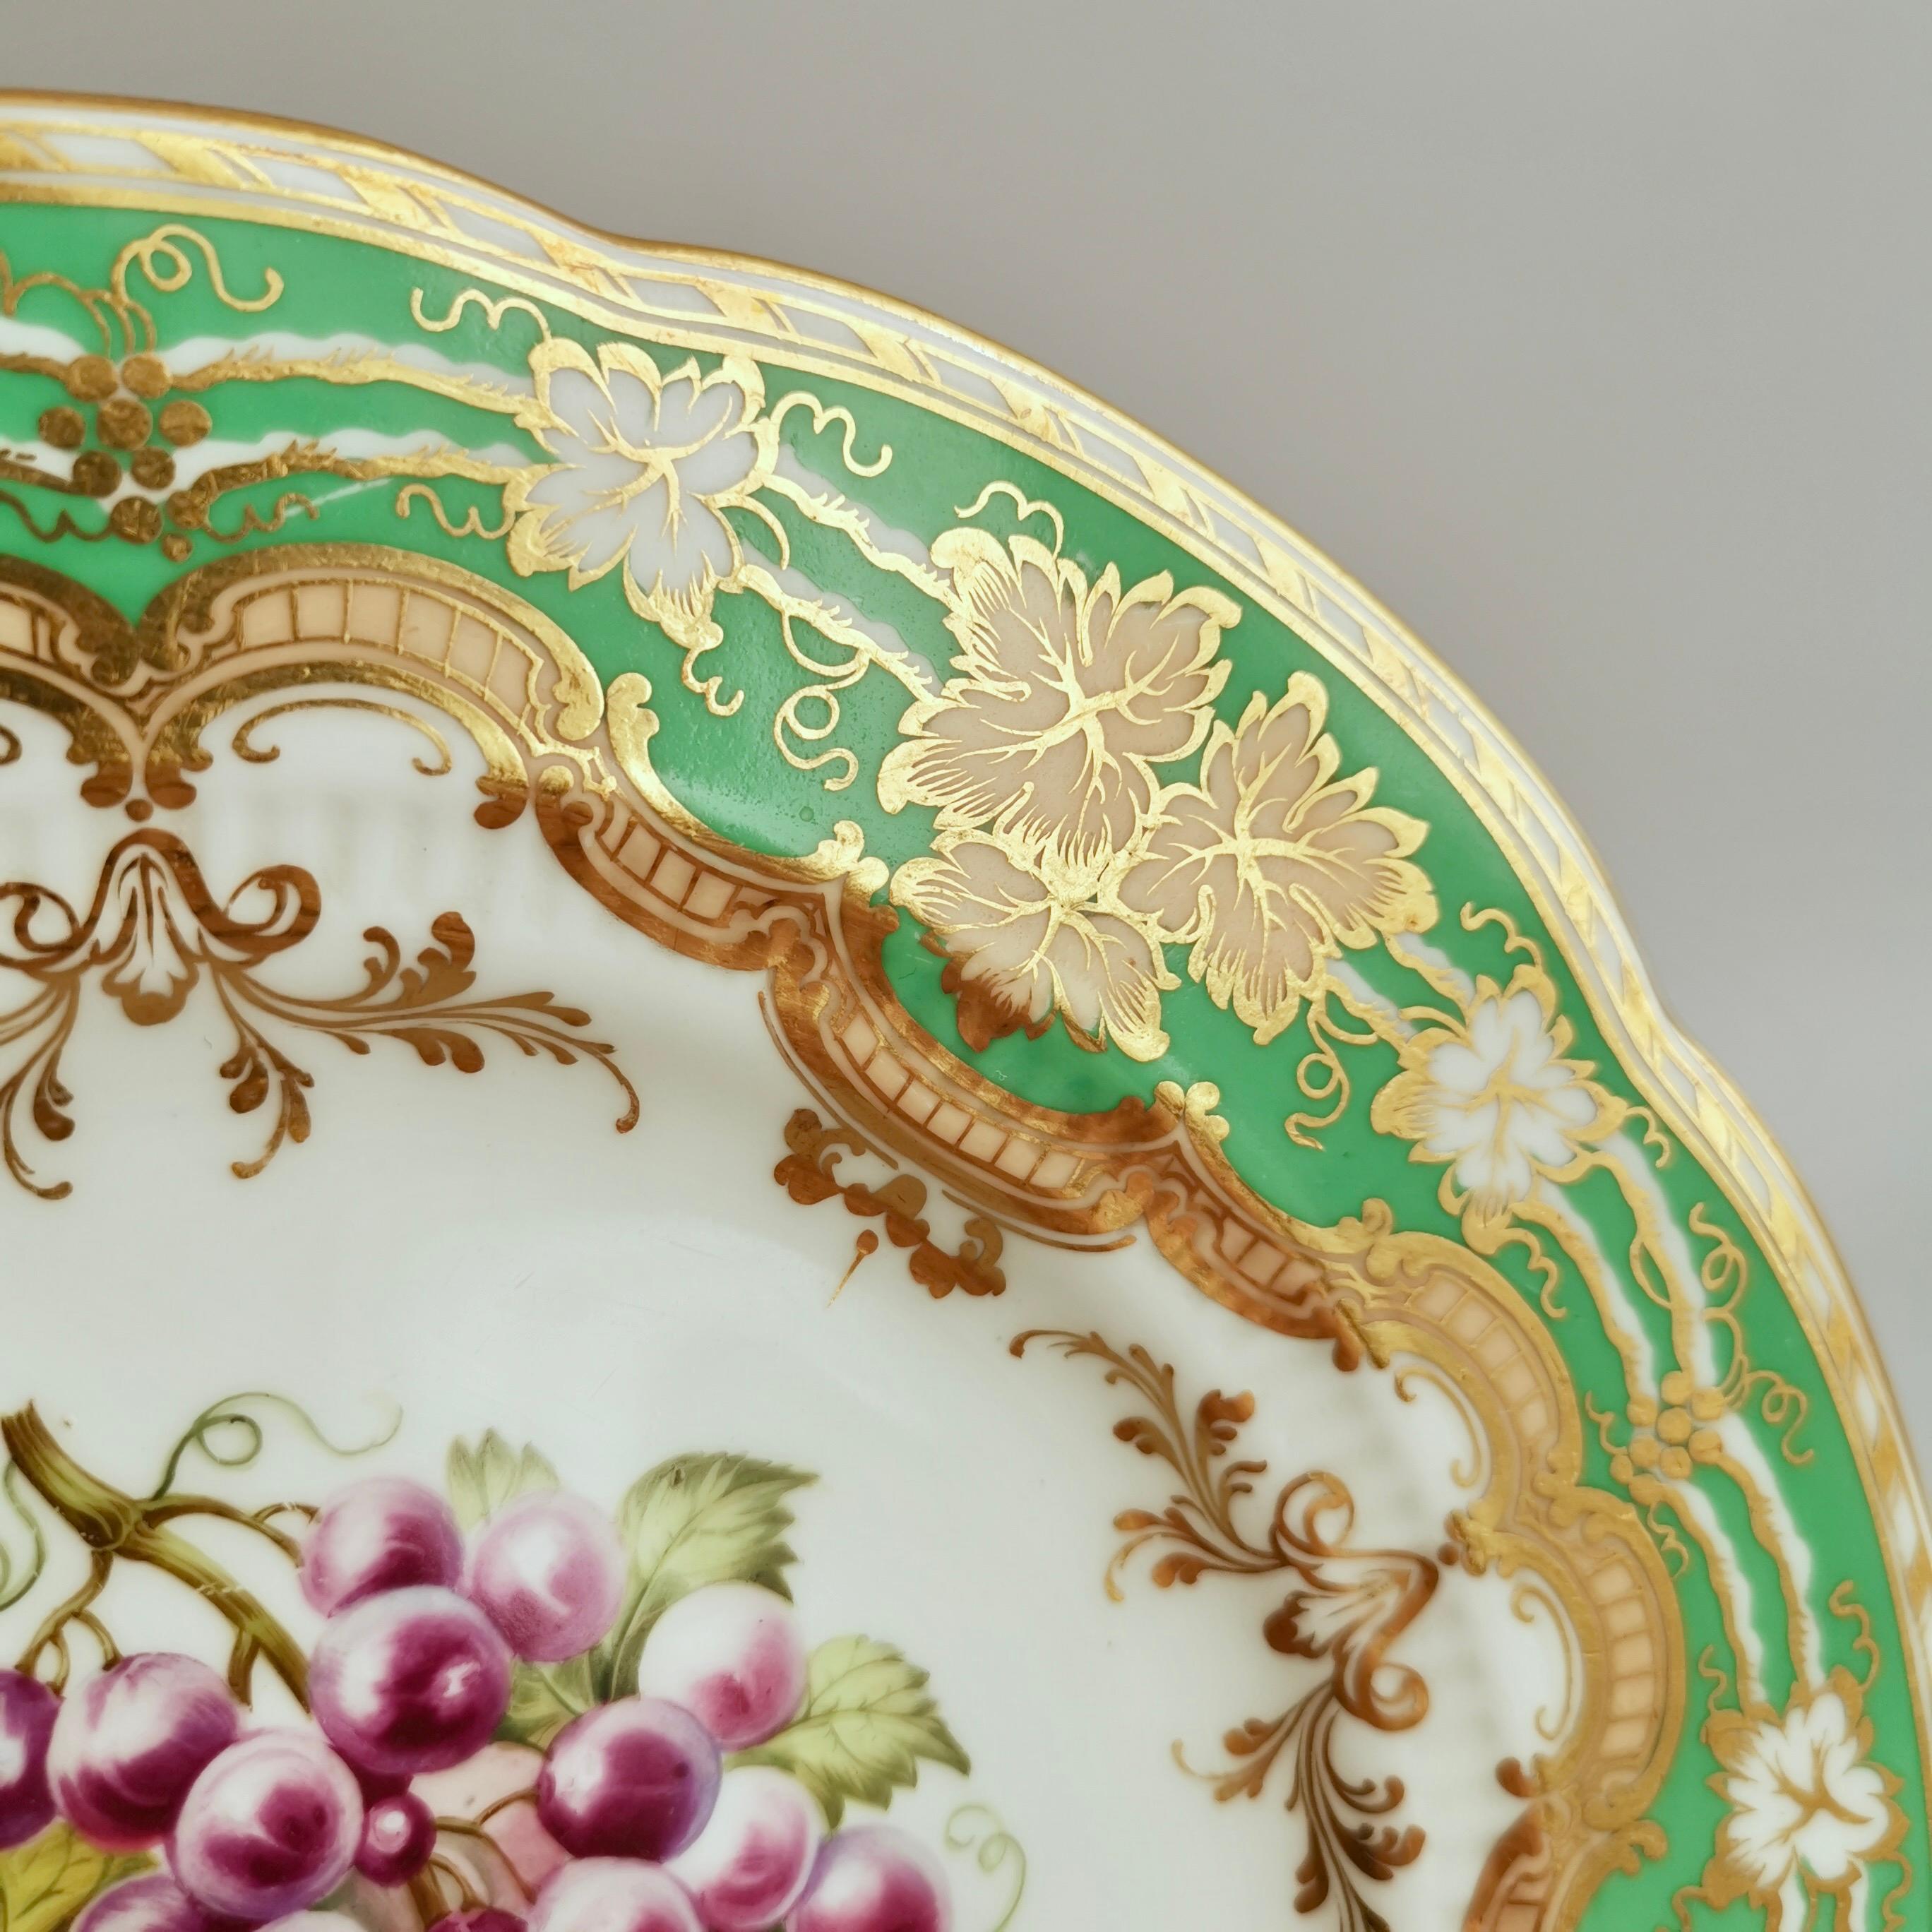 English Ridgway Plate, Emerald Green, Gilt and Sublime Hand Painted Fruits, ca 1853